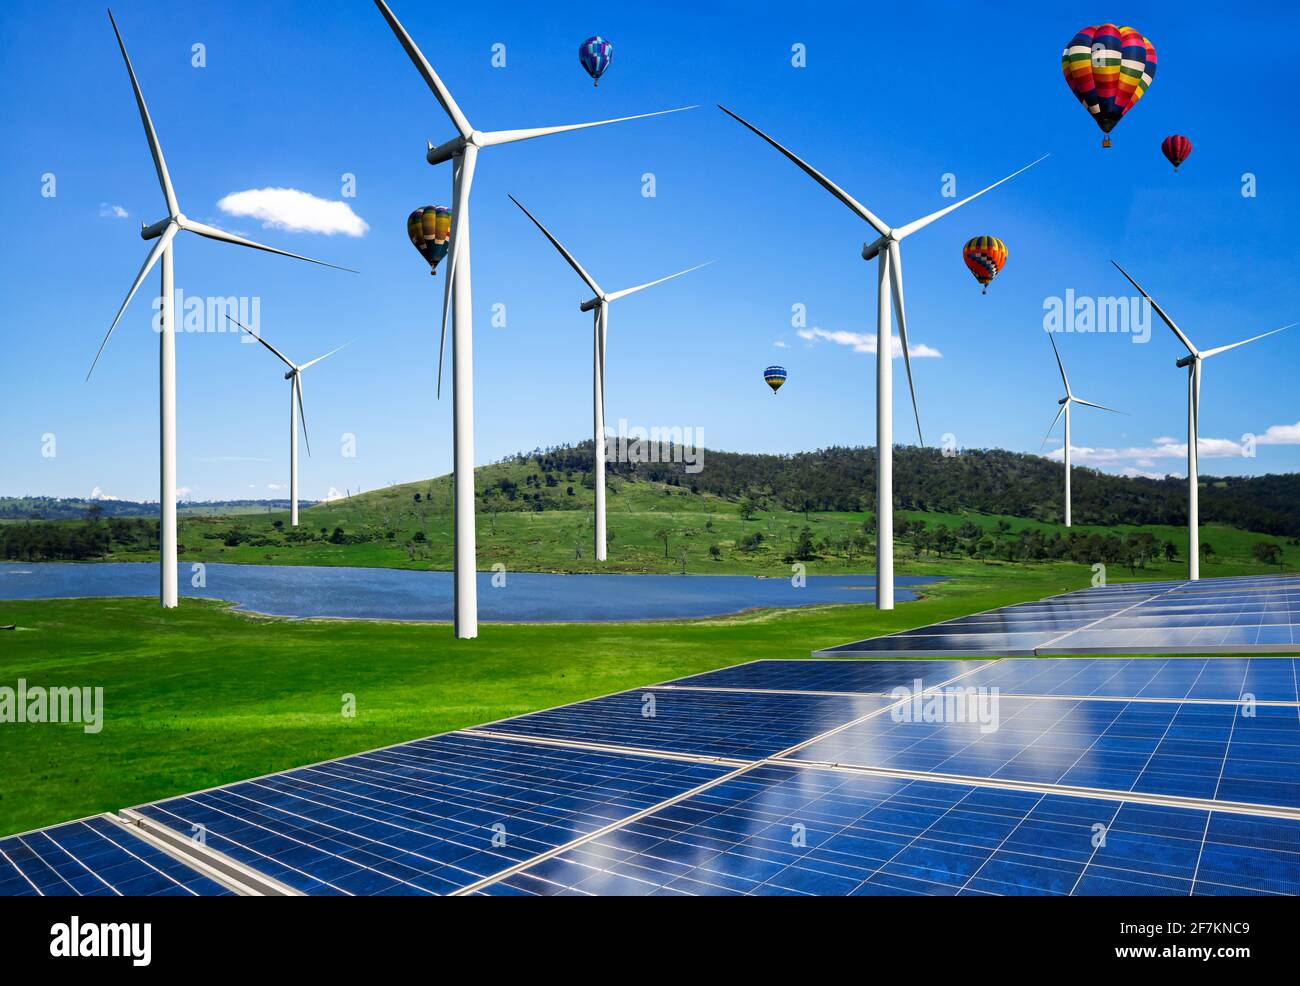 Solar energy panel photovoltaic cell and wind turbine farm power generator in nature landscape for production of renewable green energy is friendly Stock Photo